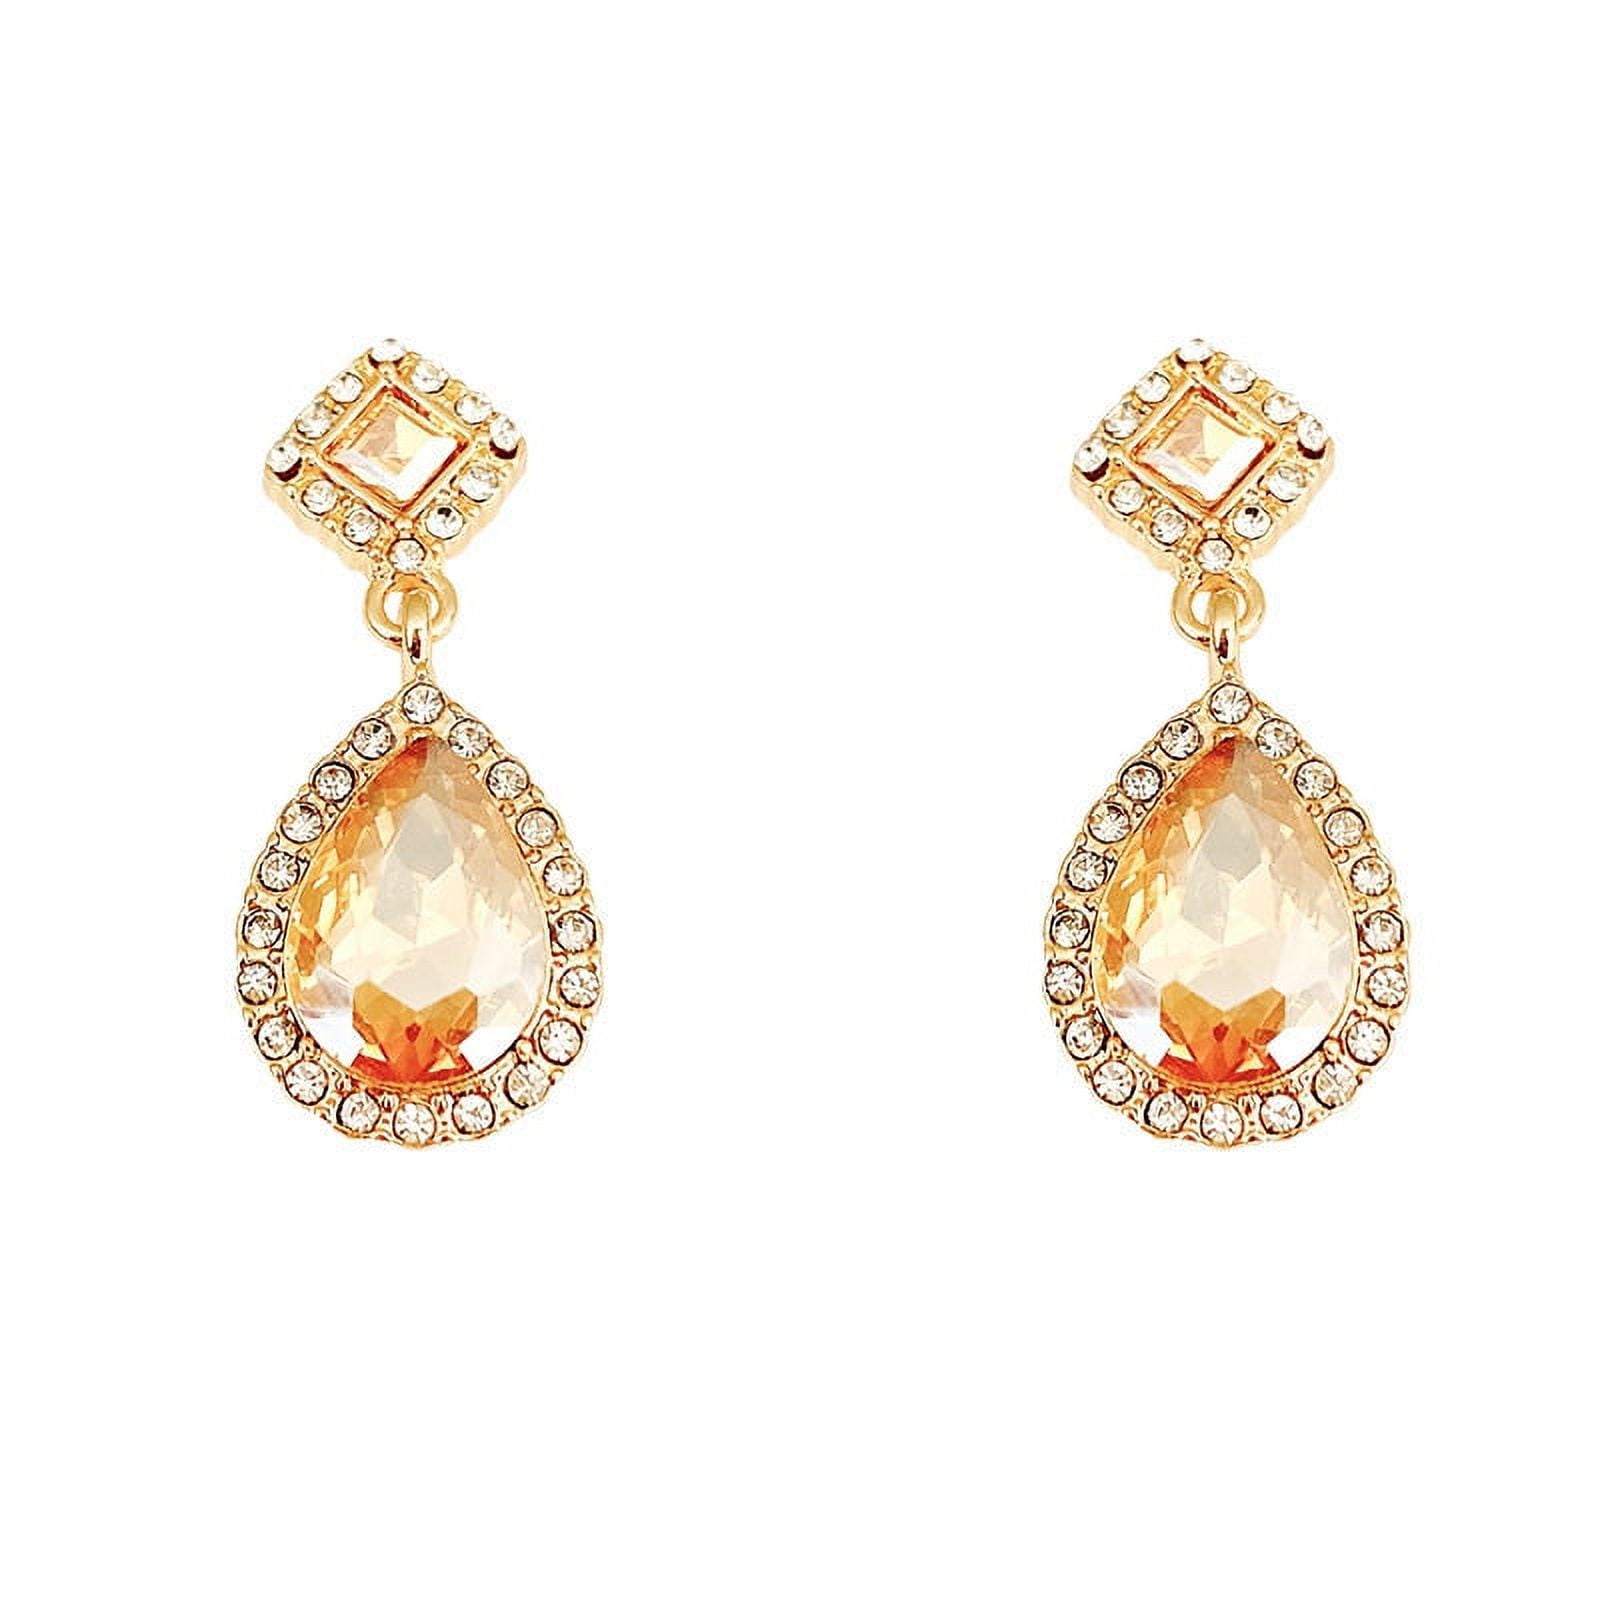 Teardrop Shaped Bridal Earring Mangtika Set With Cubic Zirconia Pendant And  Dangle For Women Earrings And Necklace Perfect For Engagement Fast Drop  Delivery DHGarden DHHT97 From Dh_garden, $87.81 | DHgate.Com